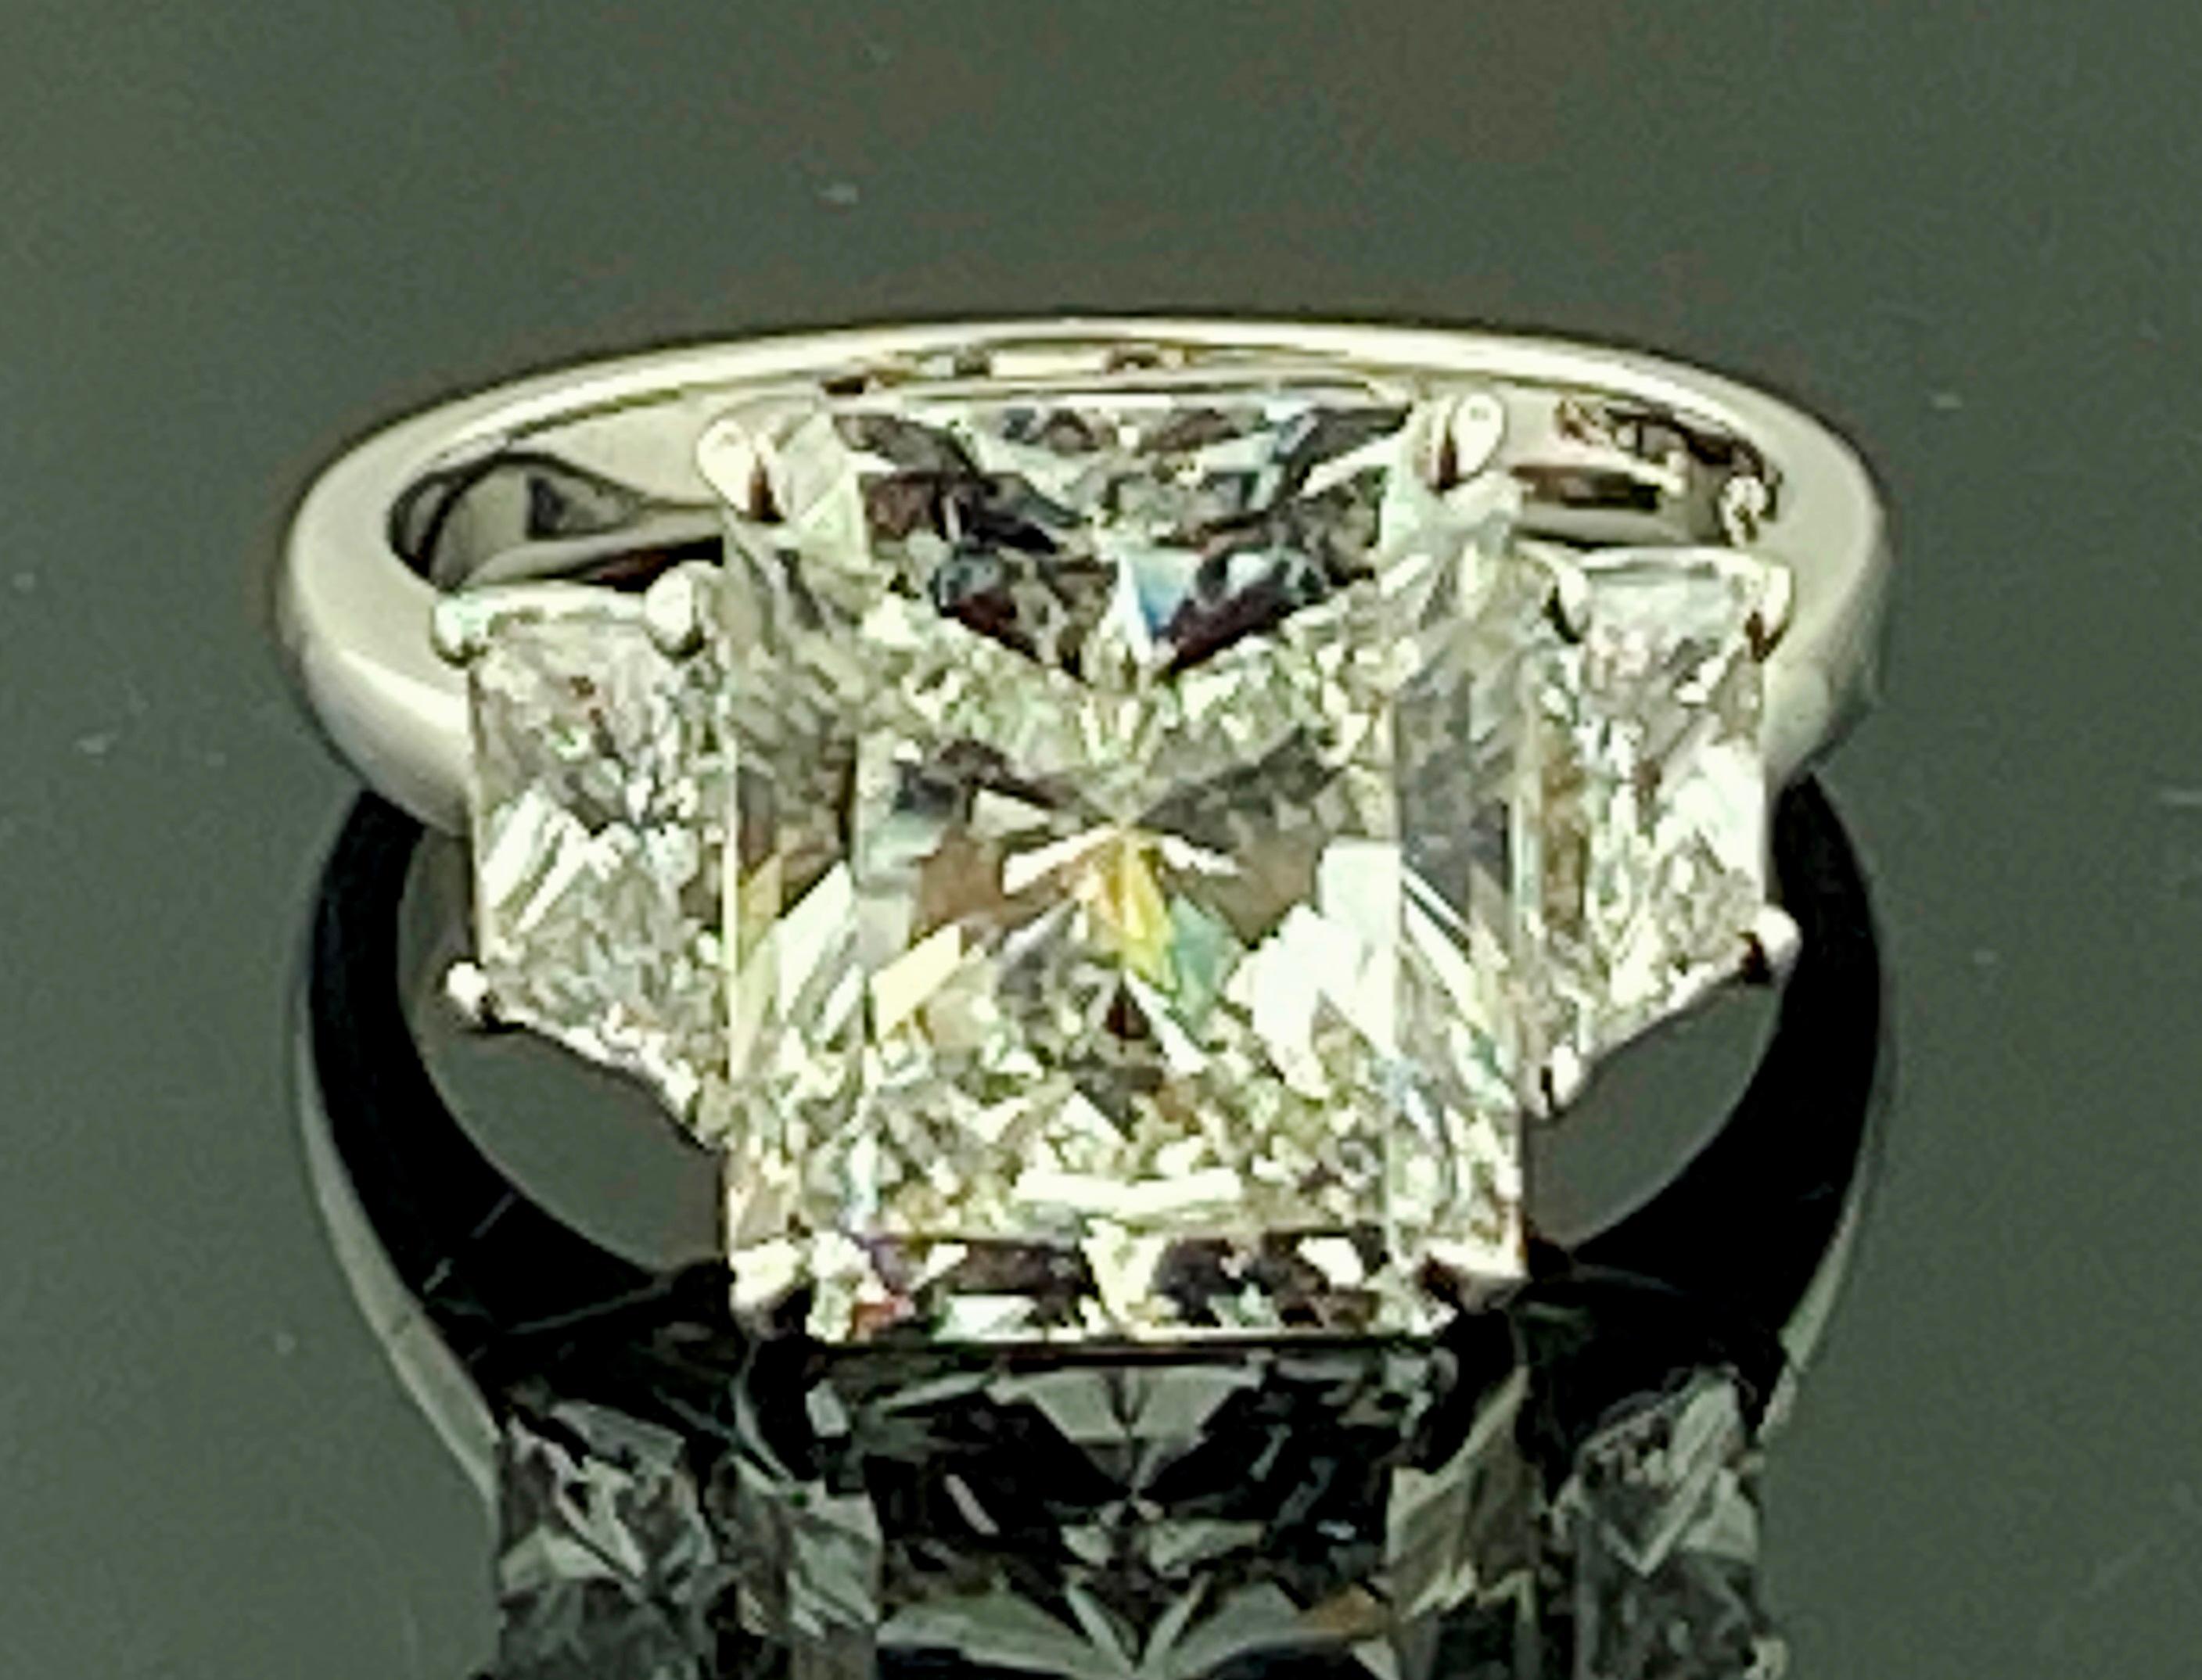 Set in Platinum, weighing 6.93 grams, is a 5.39 carat Radiant Cut Diamond, GIA Report #110112107523, Color: I, Clarity: SI-1.  On the sides are two Trapeziod cut diamonds with a total diamond weight of 1.20 carats, Color: G-H, Clarity: VVS.  Ring